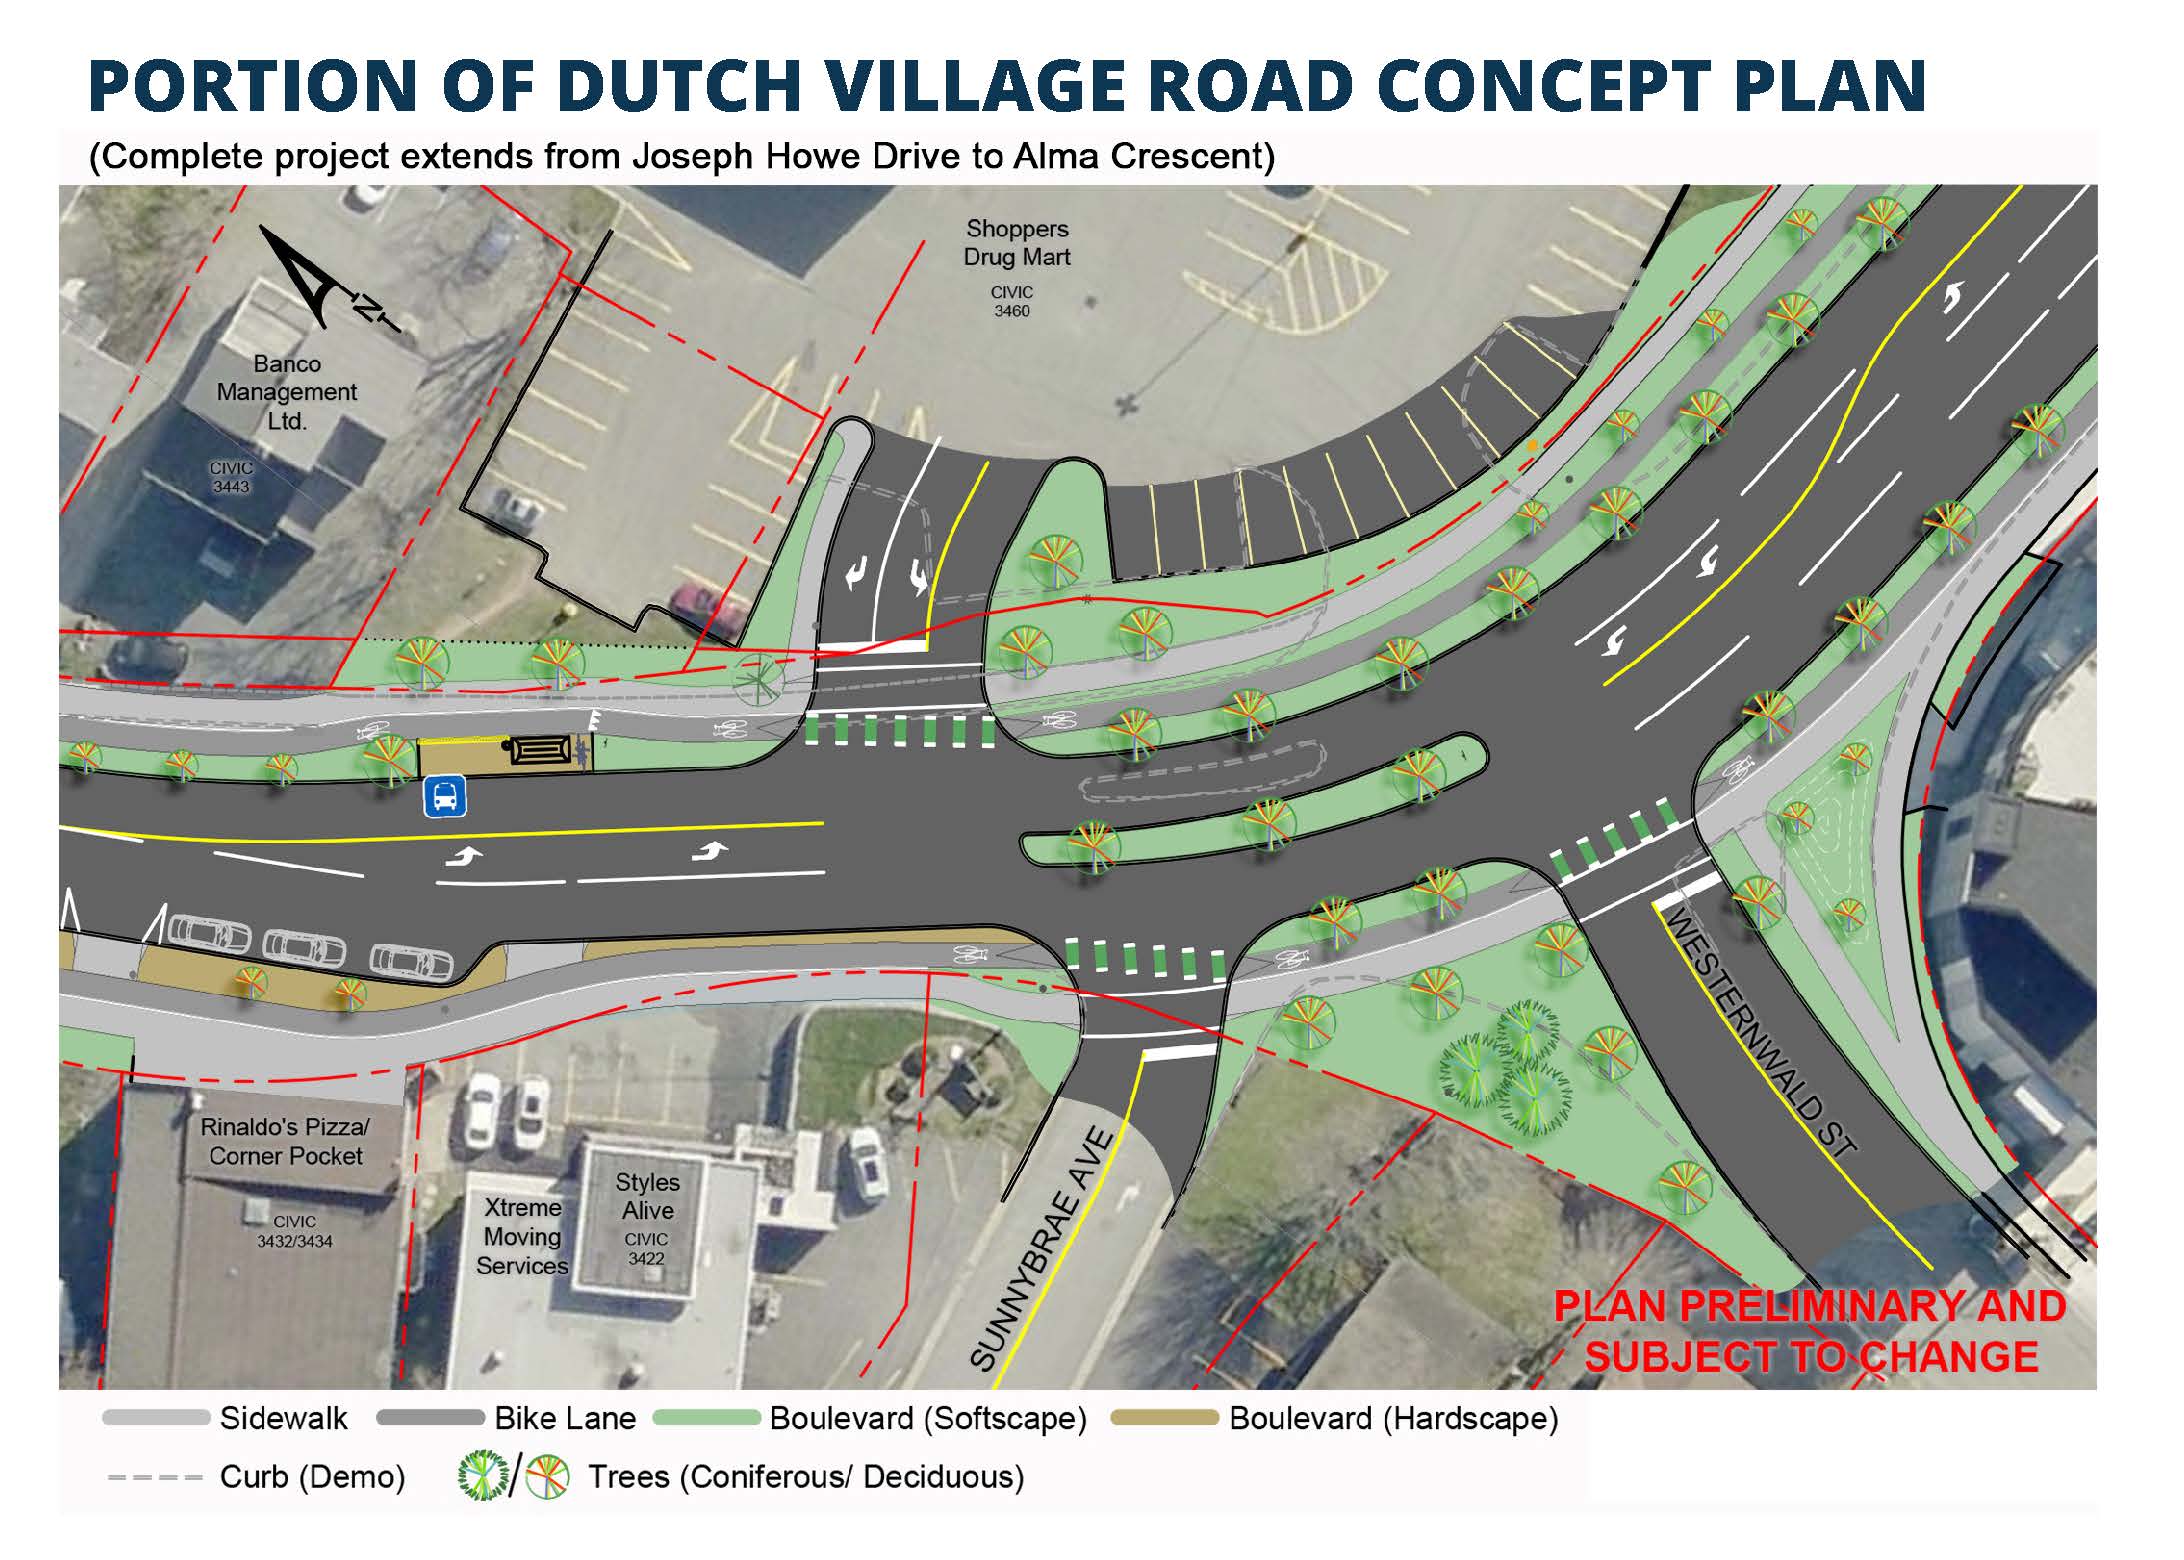 Map of Dutch Village Road showing proposed changes